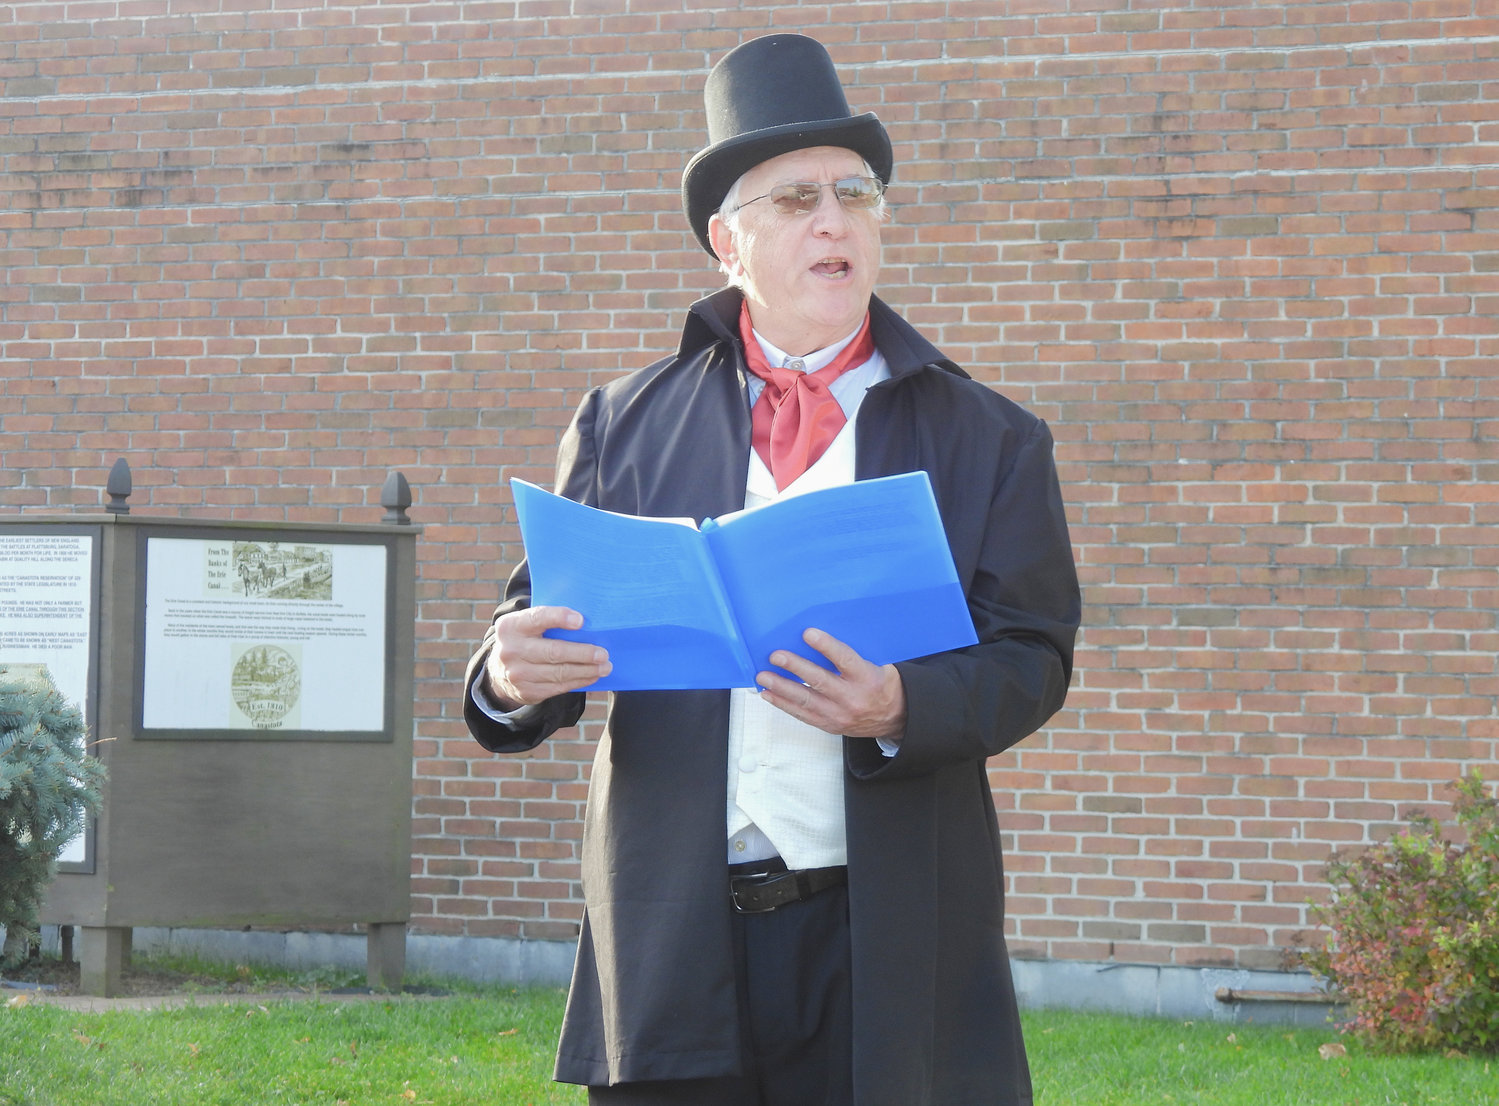 Canastota resident Vincent Doty takes on the role of James Caleb Jackson and recounts "his" attendance of the New York Antislavery Society in Utica that ended with Jackson and company being chased by an angry mob, invited to Peterboro by millionaire philanthropist Gerrit Smith, and ending with a long walk through Canastota to Peterboro.